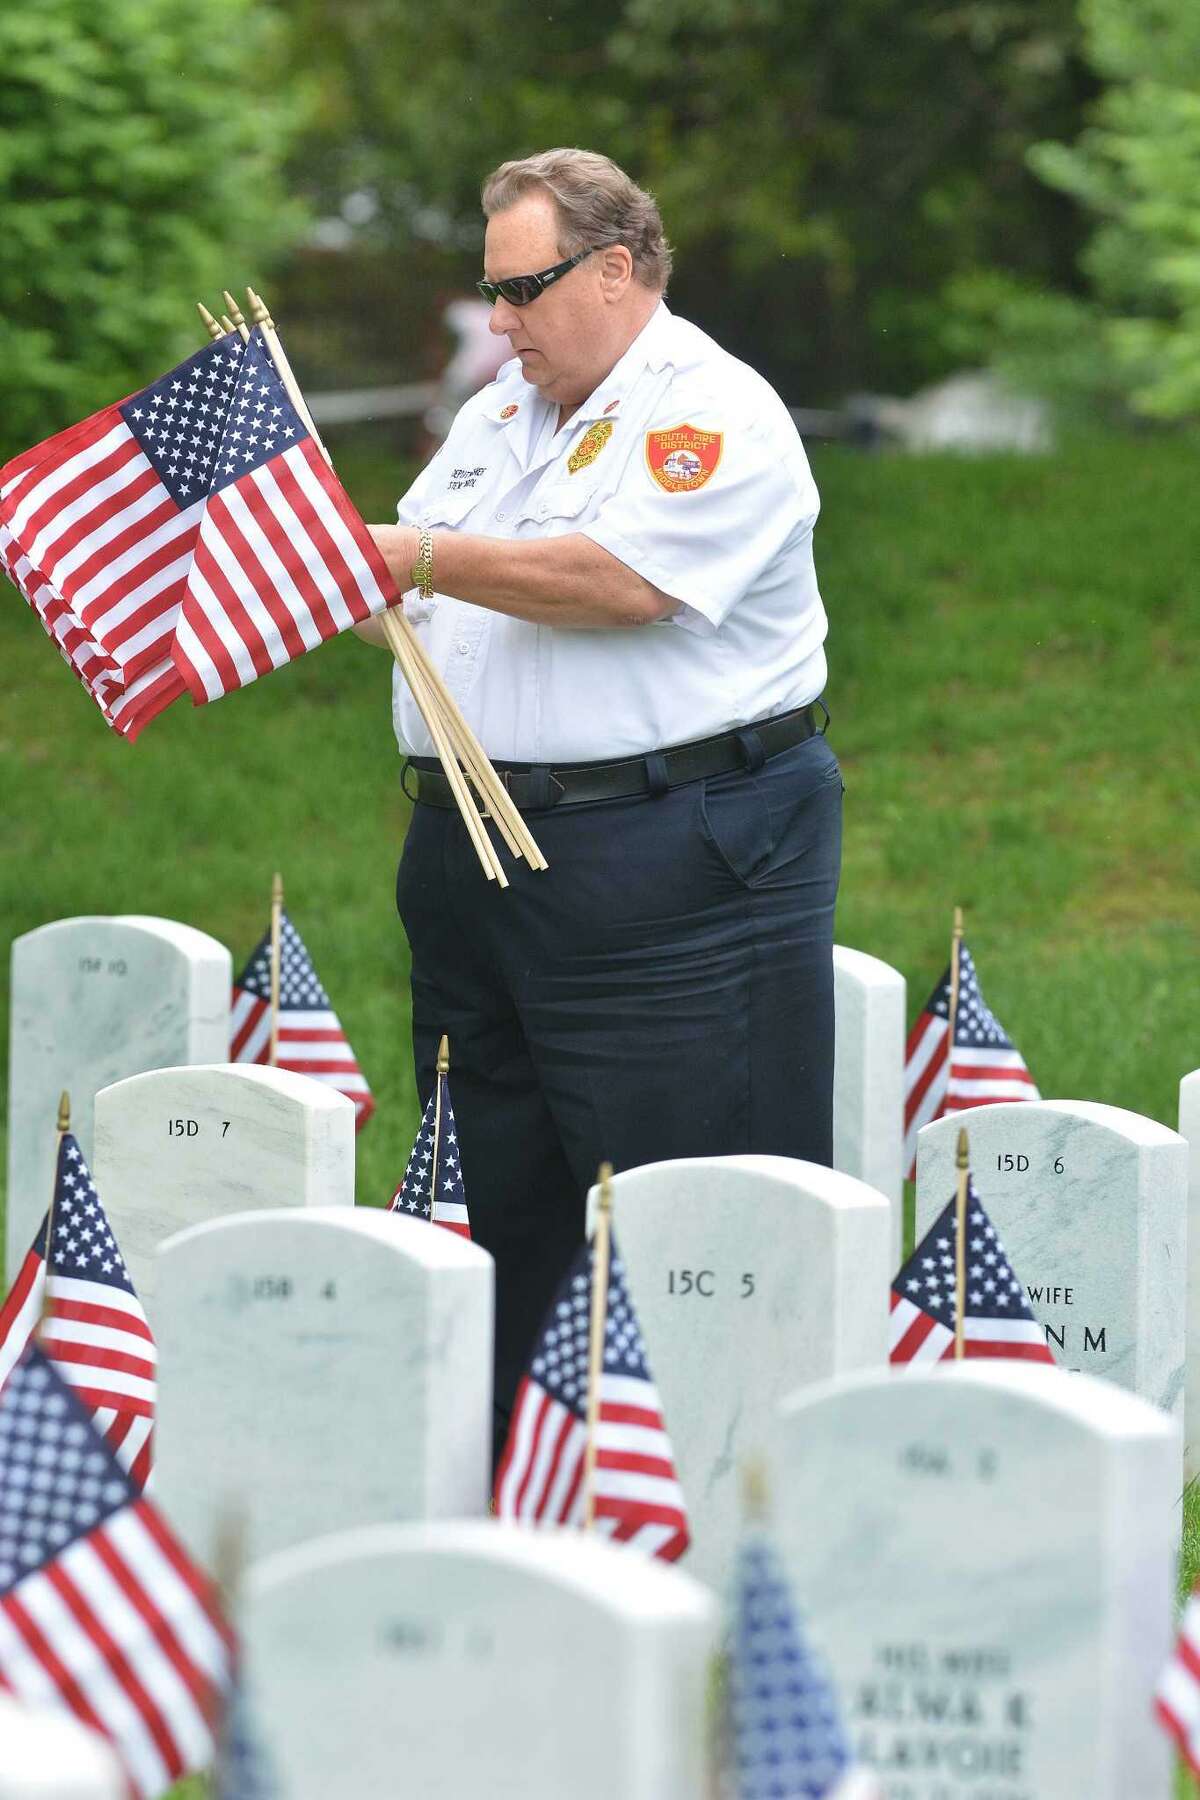 Deputy Chief and Fire Marshal Steven Krol joined of the South Fire District to help local veterans place American Flags at over 6,000 headstones at the Connecticut State Veterans Cemetery at 317 Bow Lane in Middletown on May 23, 2014.